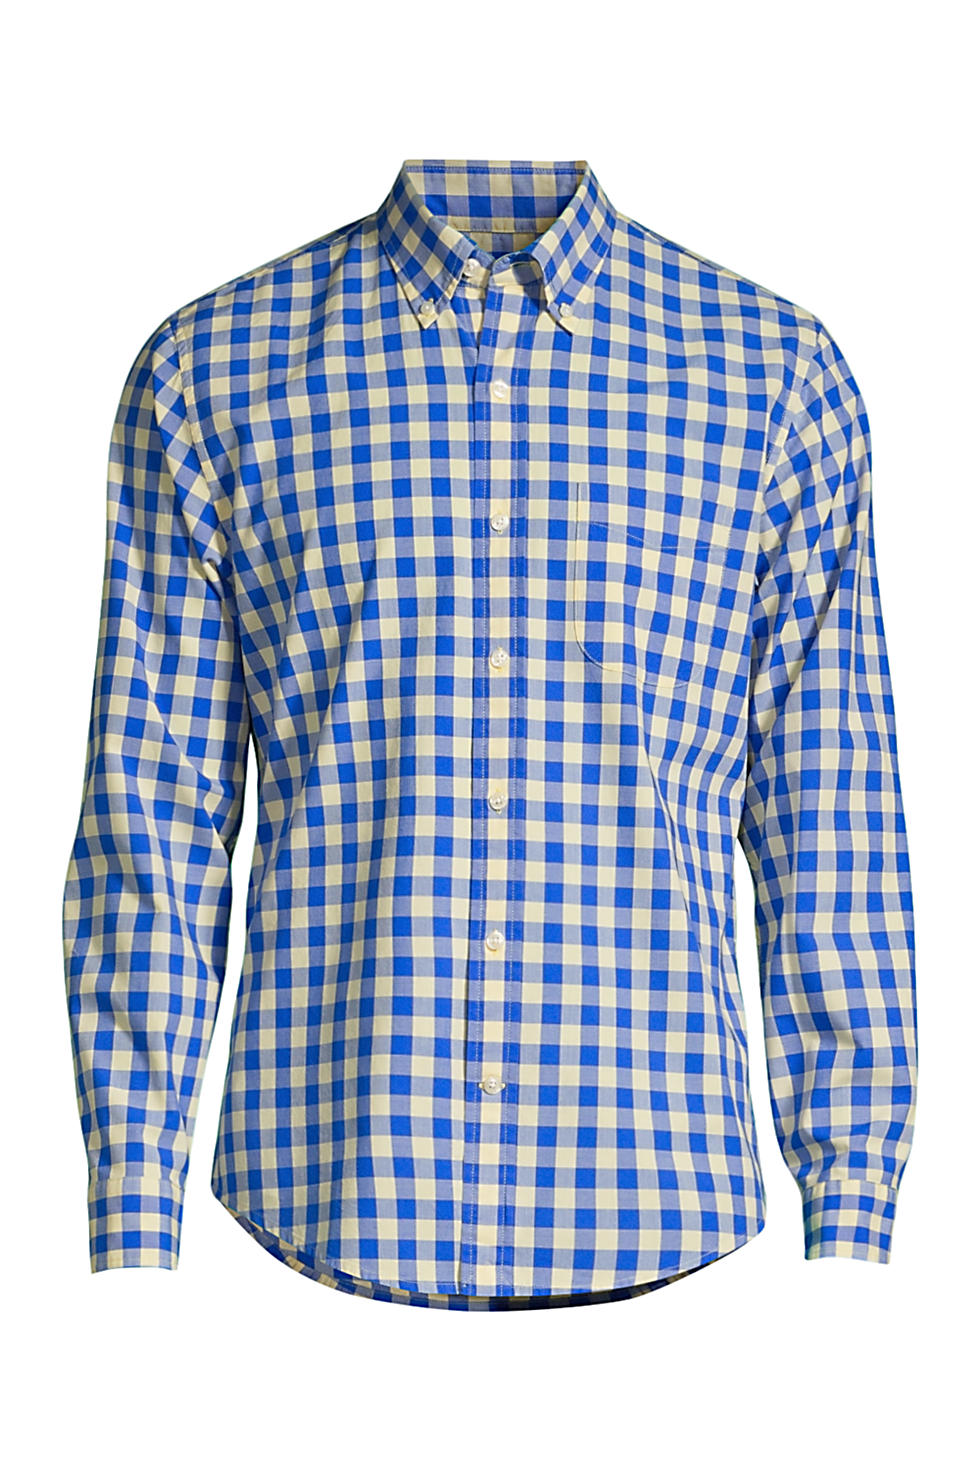 Lands End Mens Traditional Fit Essential Lightweight Poplin Shirt (various styles/sizes)